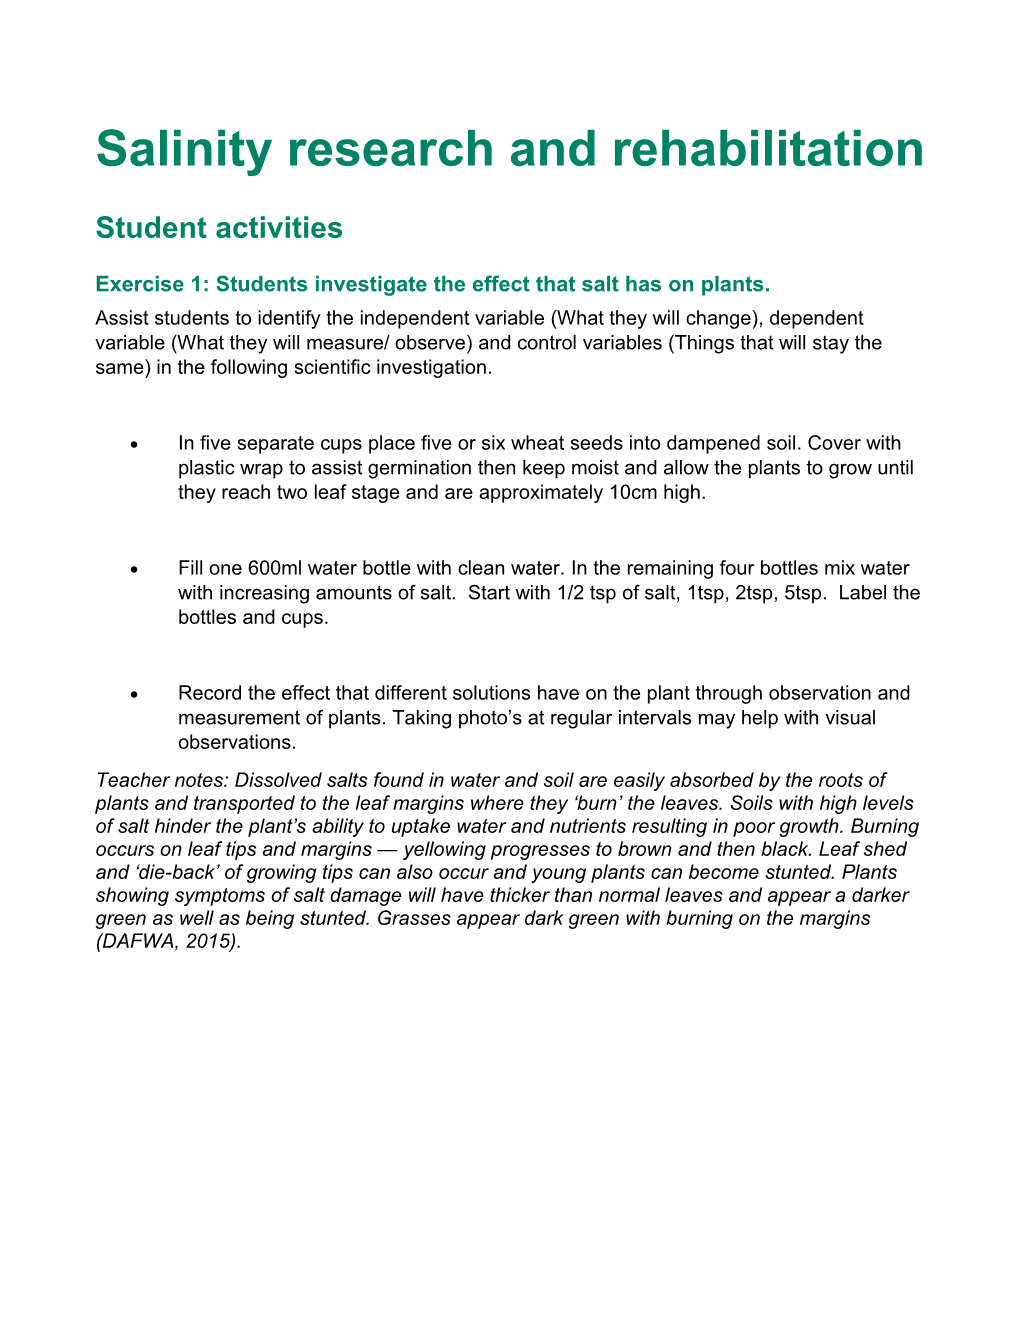 Salinity Research and Rehabilitation